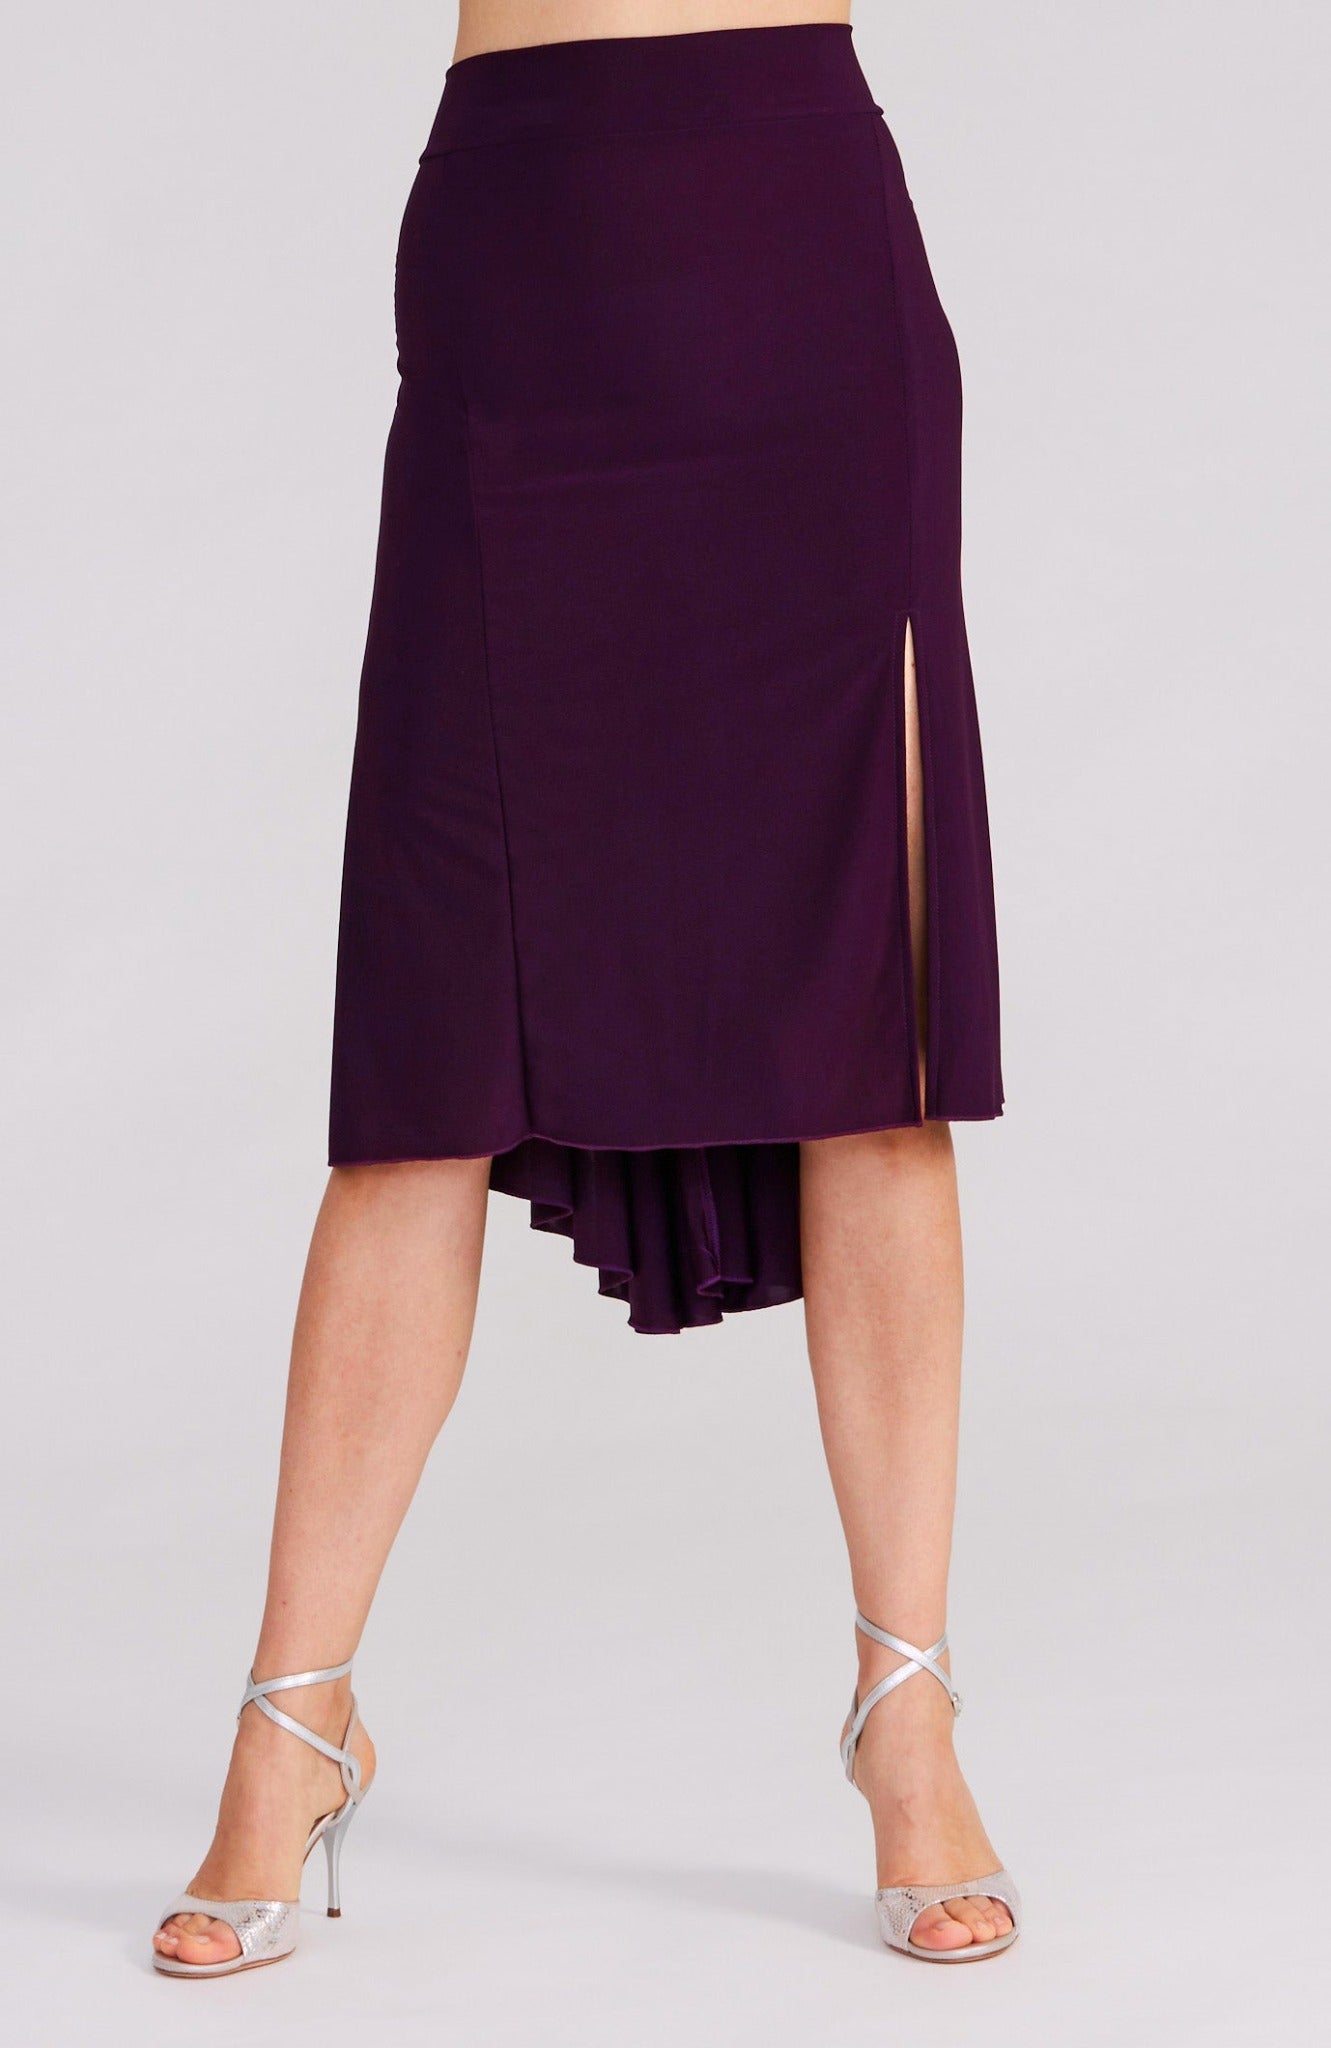 argentine tango skirt in violet with slit